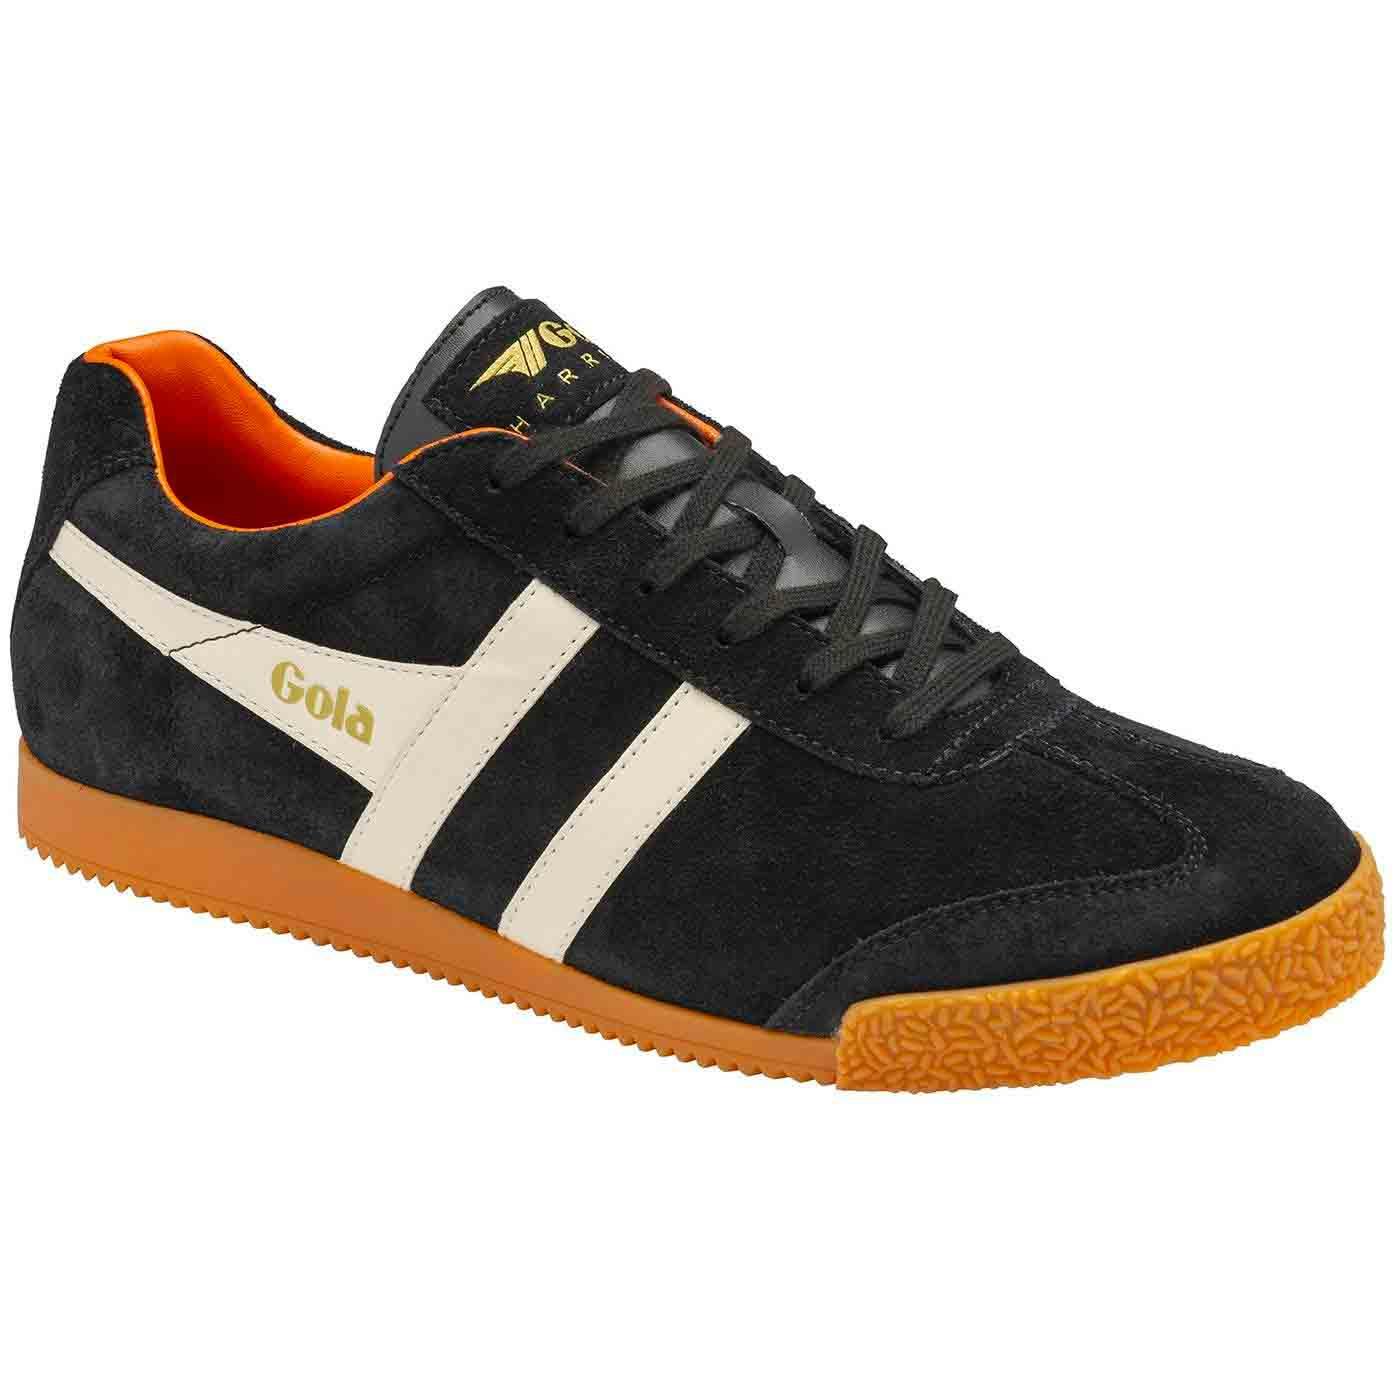 GOLA Harrier Suede Womens Retro Trainers (B/OW/MO)